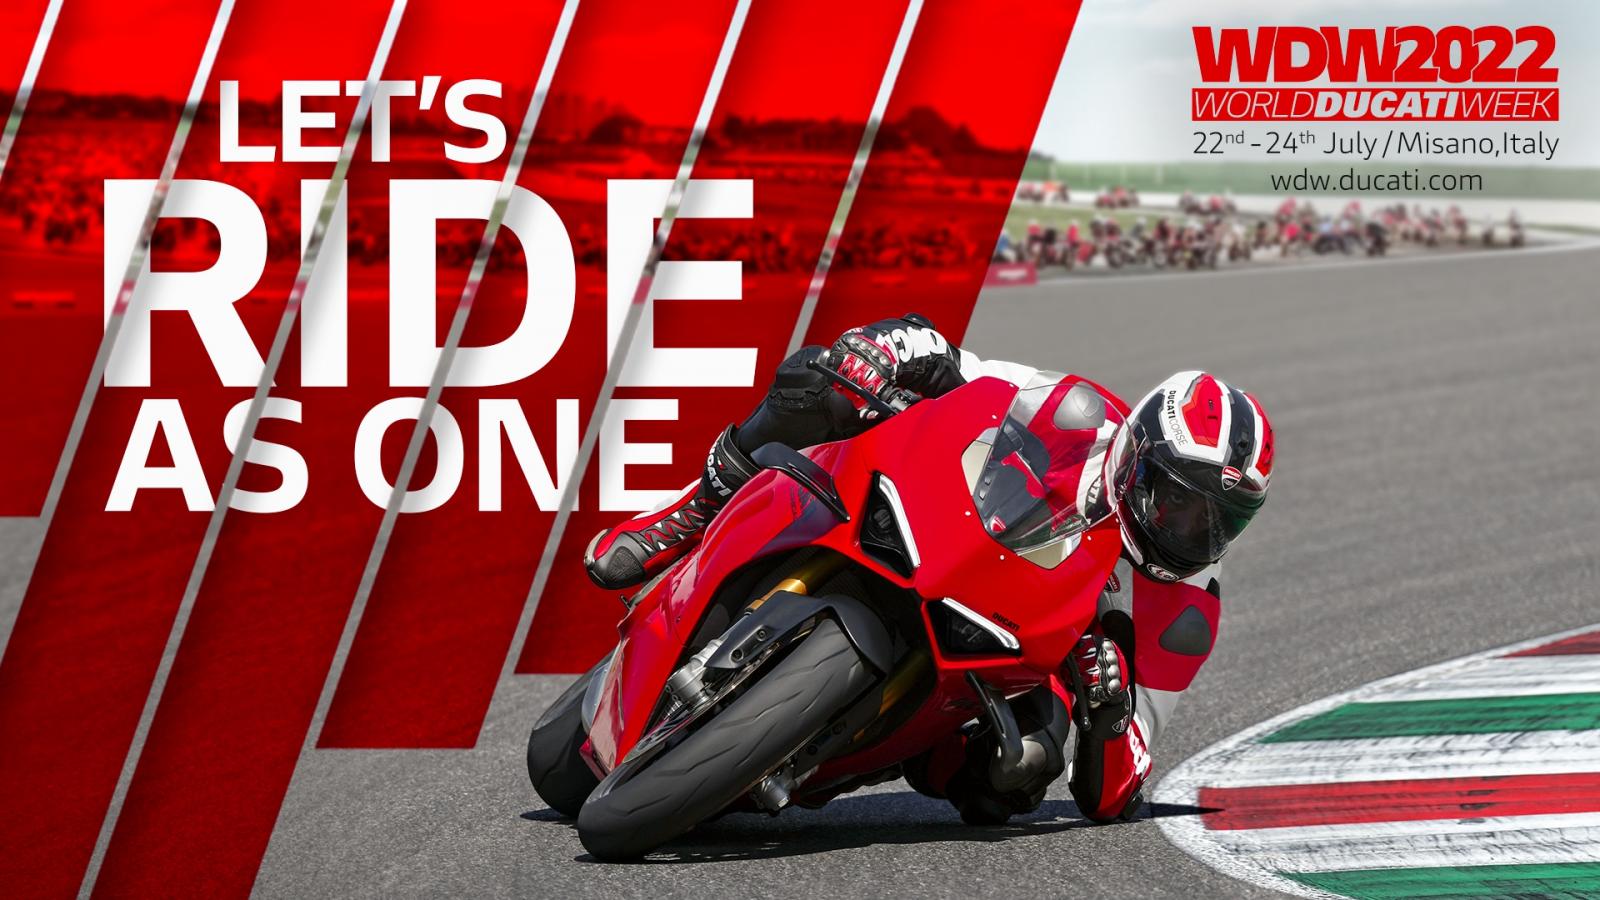 EICMA to Participate in the World Ducati Week 2022